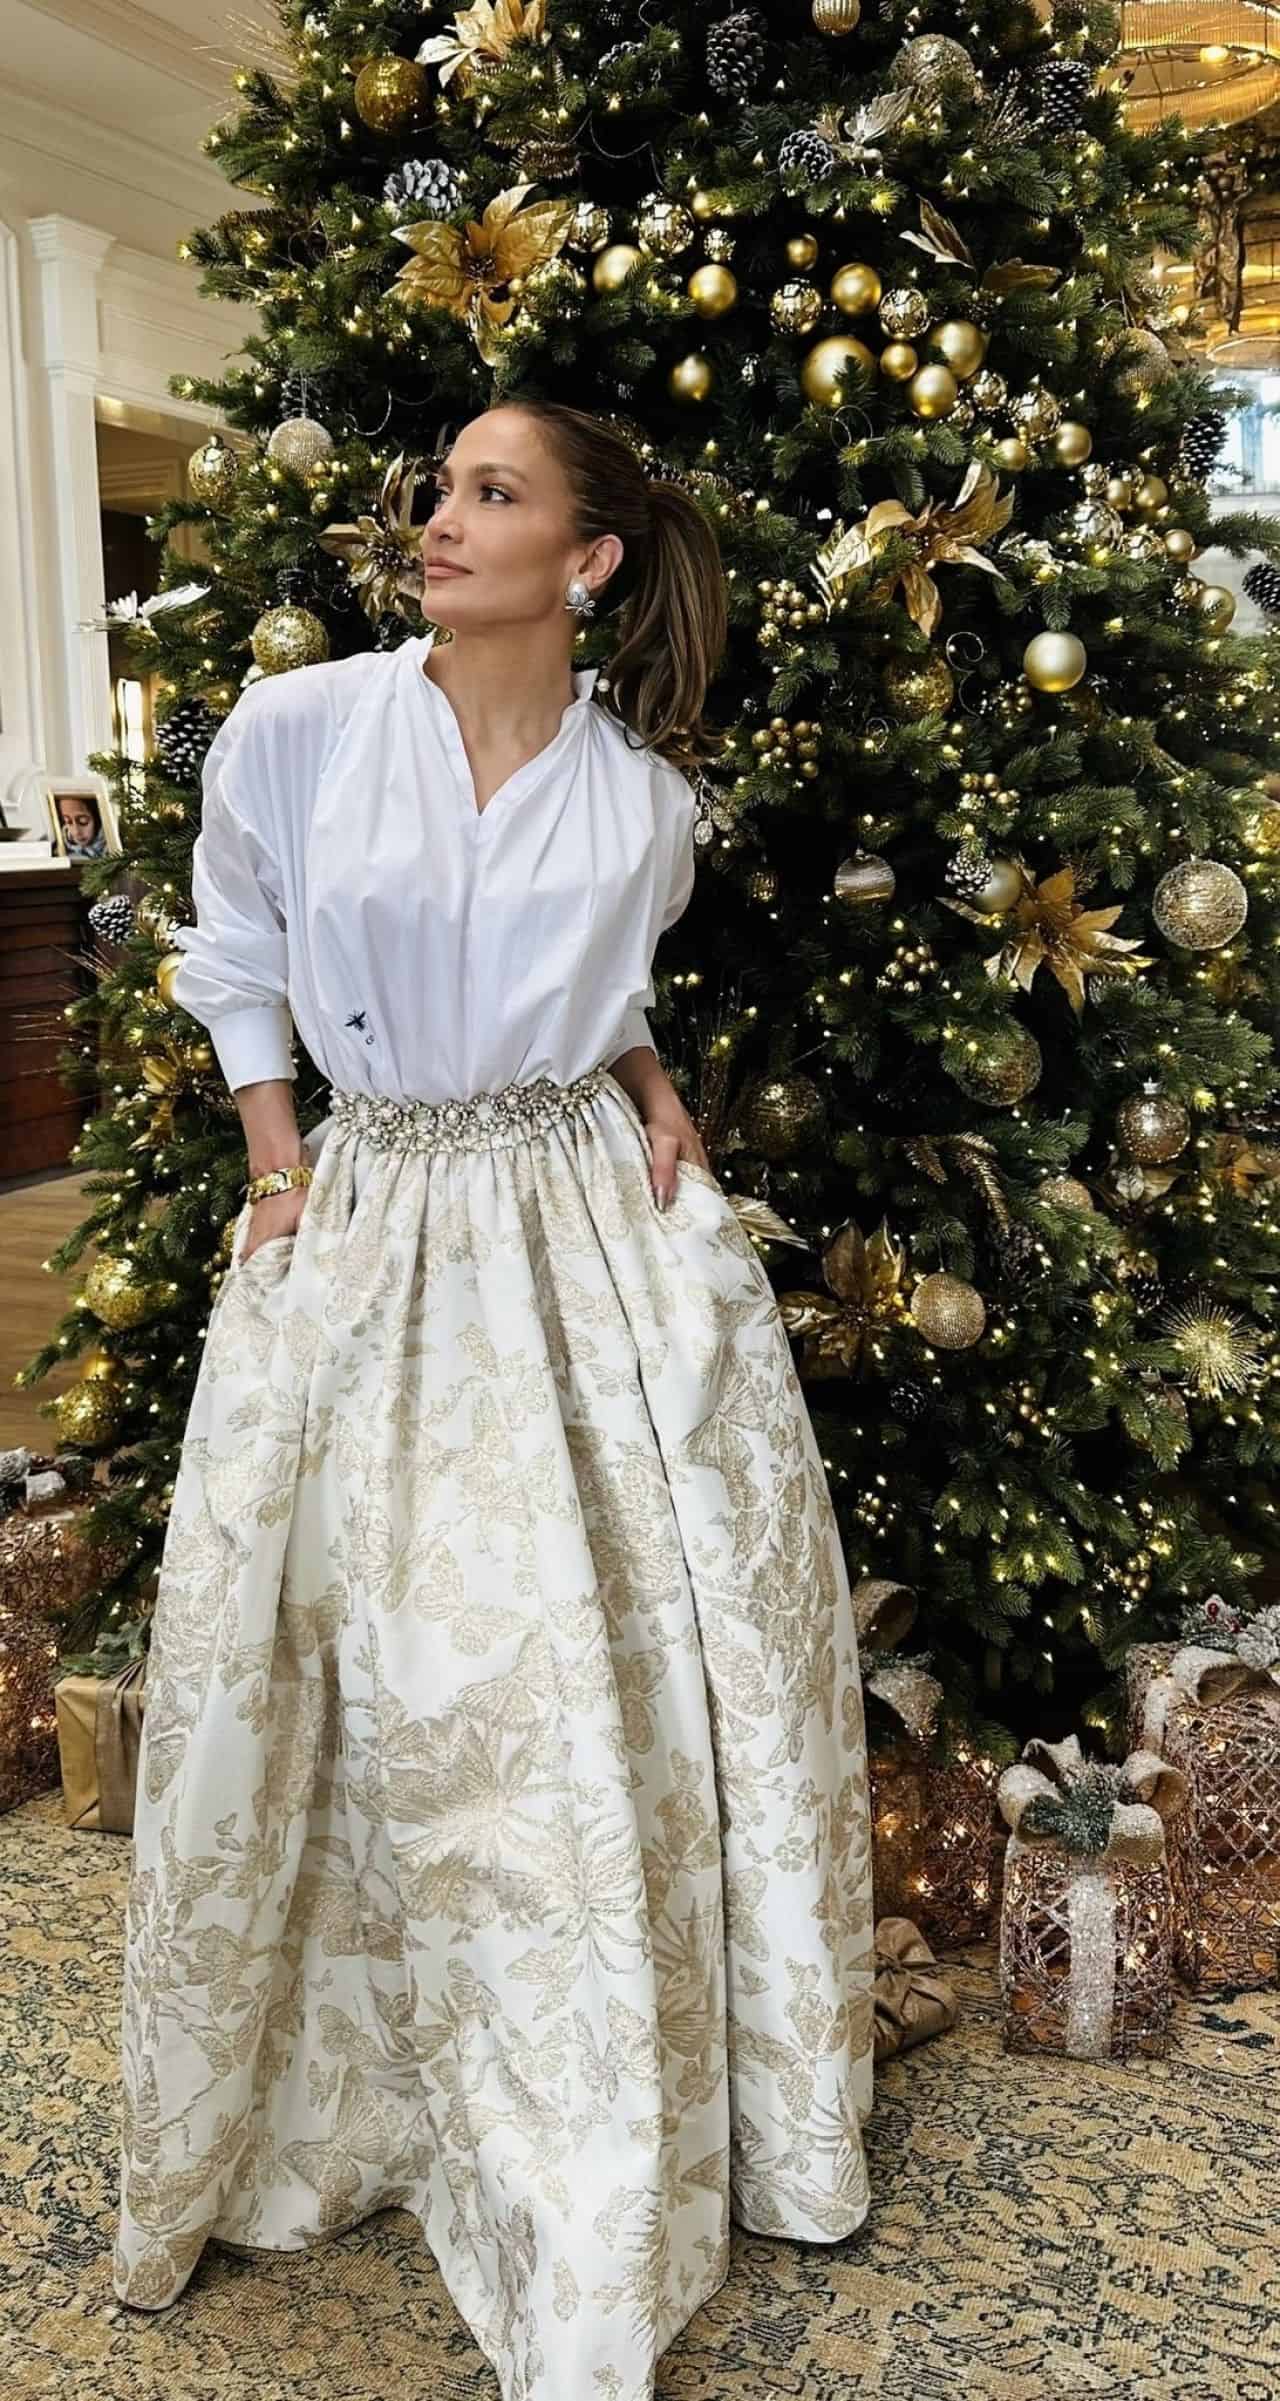 Jennifer Lopez Captivates in Holiday Style Next to a Grand Christmas Tree